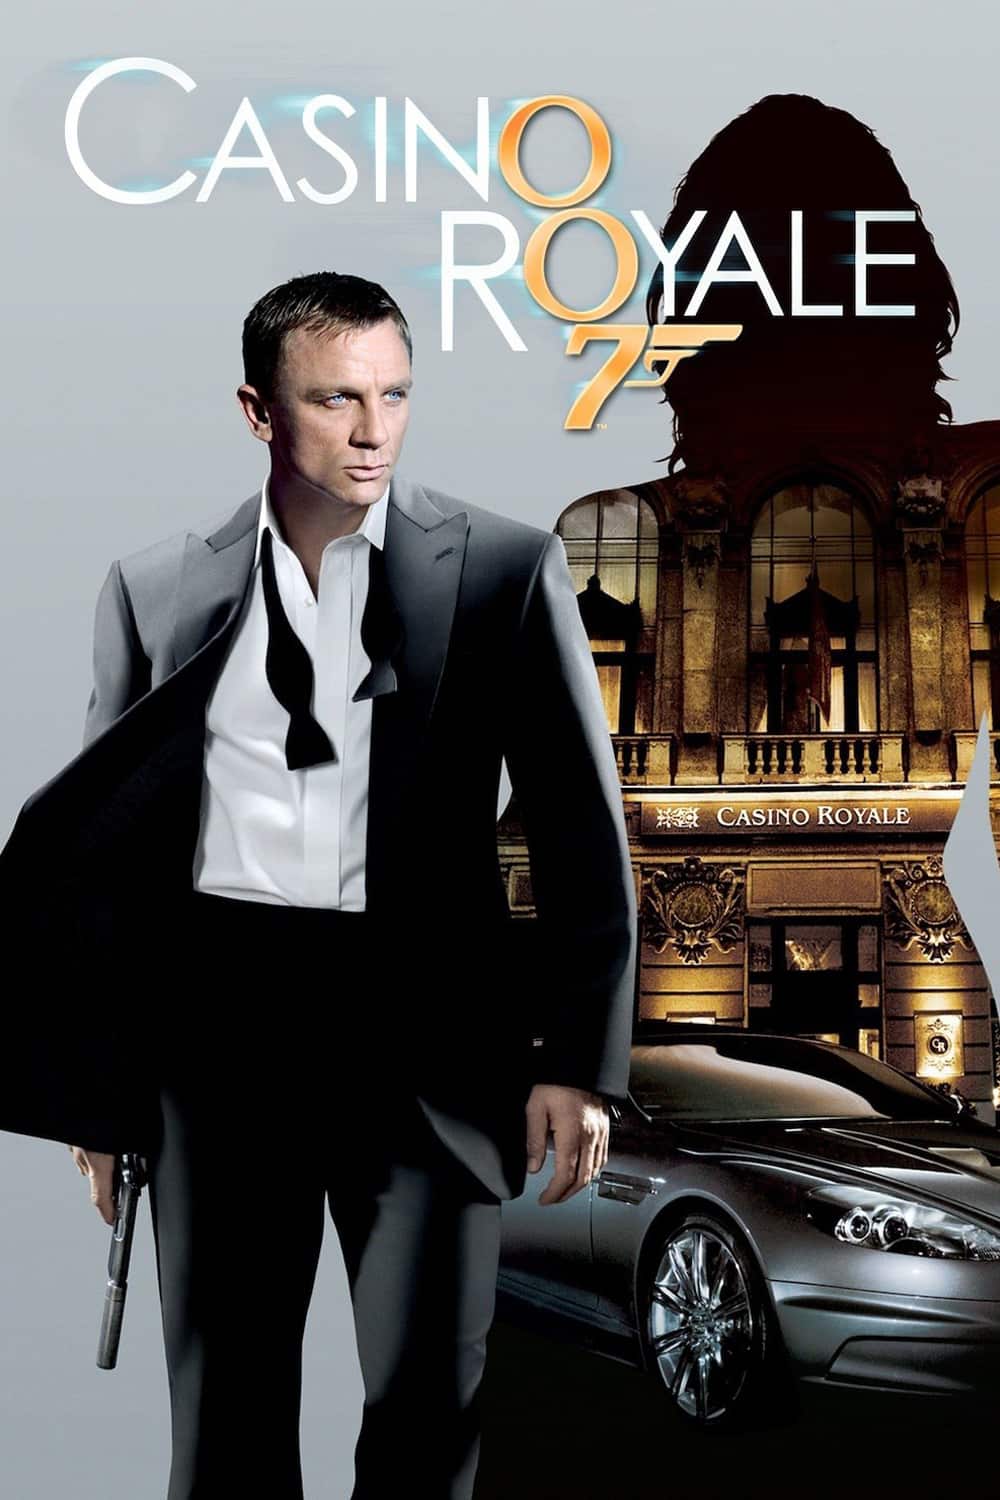 casino royale online free games